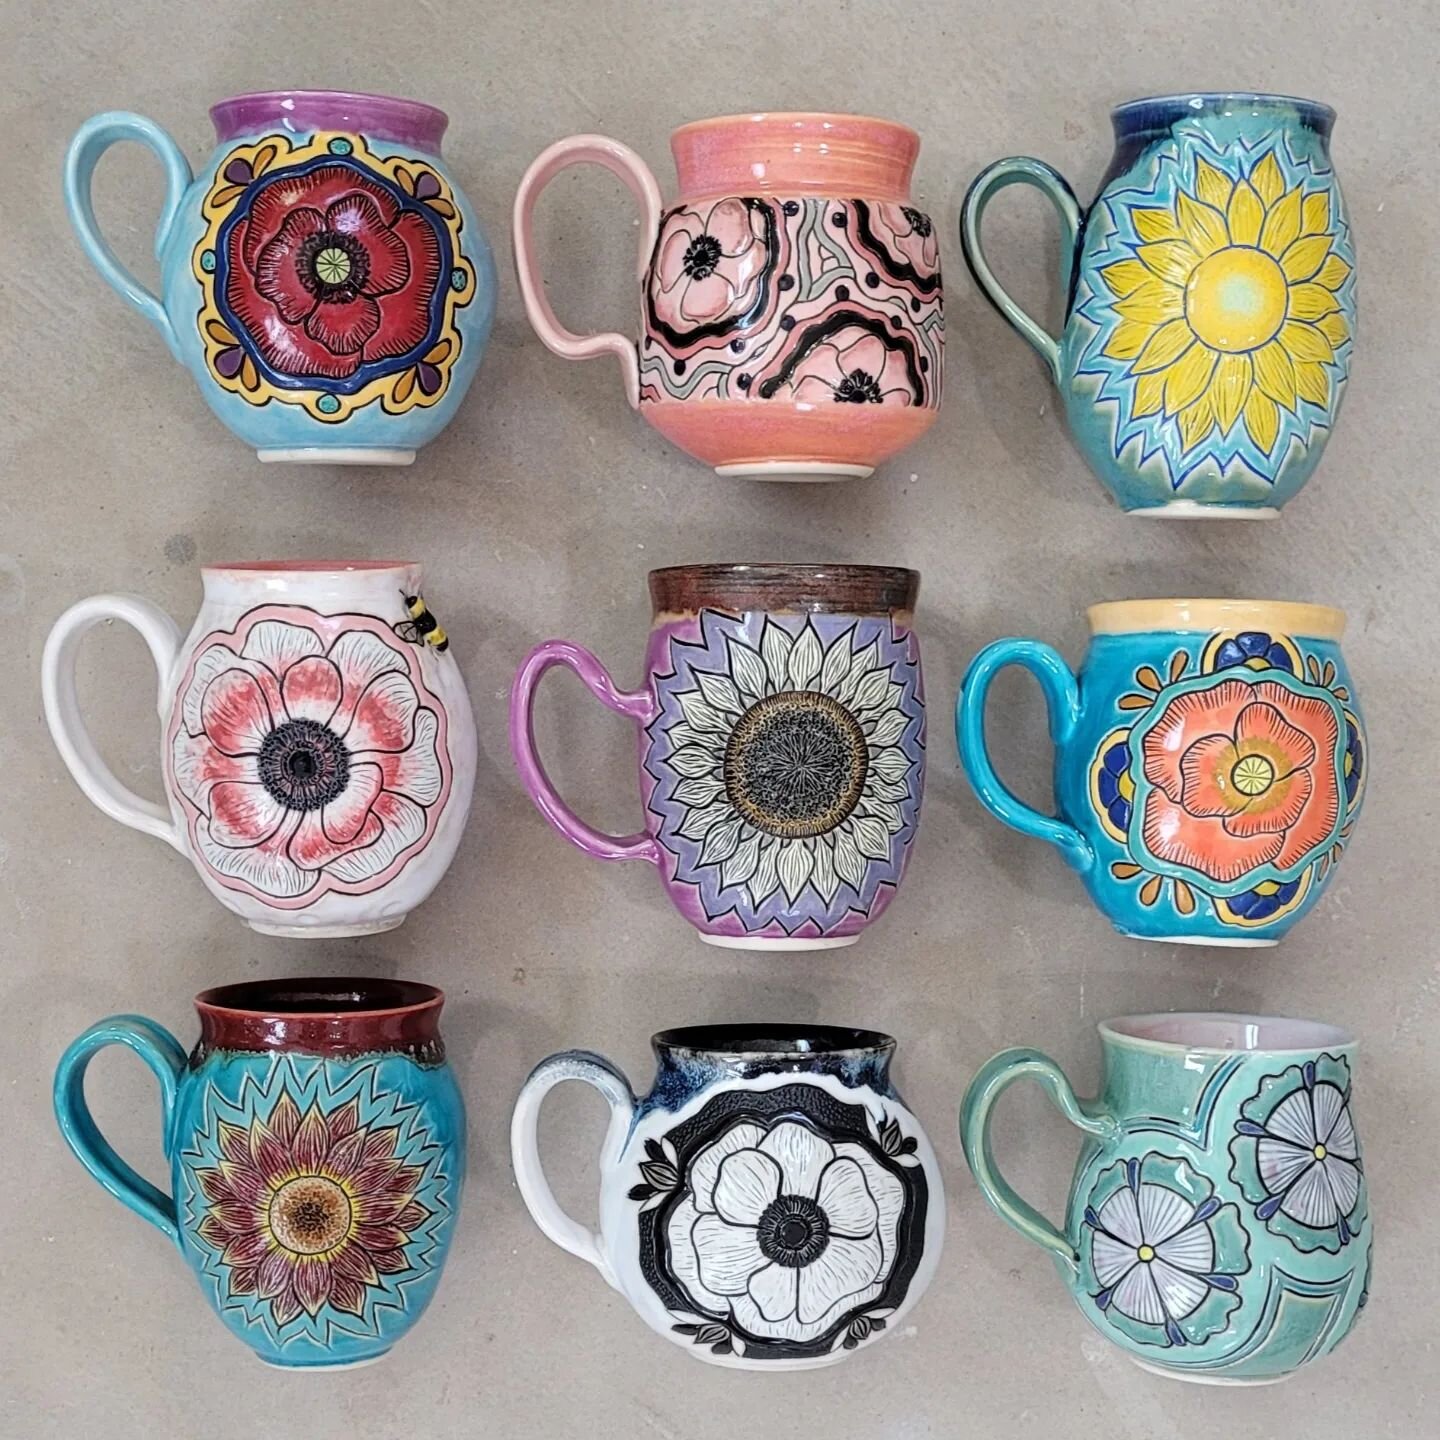 Real Flowers with names vs. Made-up Fakey Flowers...which do you prefer? Let me know in the comments 👇👇👇 I'm ready to get started on the next batch!
.
.
.
#sunflower #carve #color #floral #mug #mugshot #poppy #anemone #morningglory #illustration #